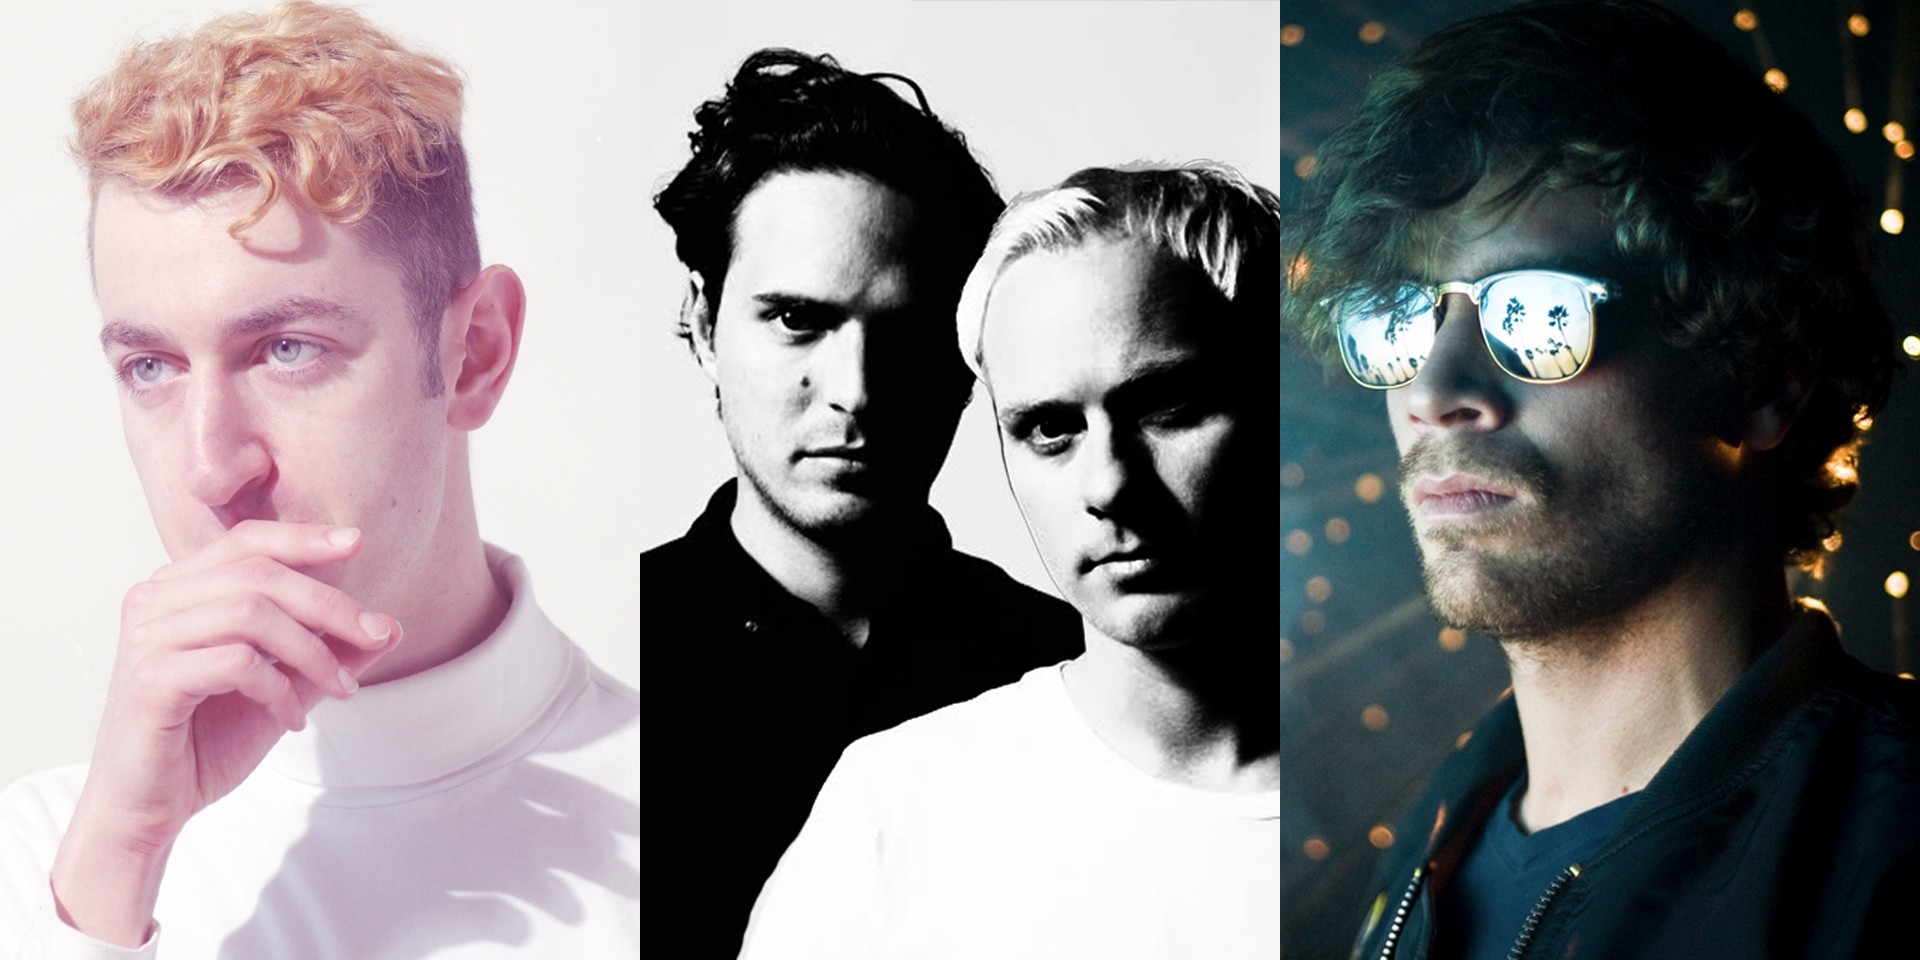 Chrome Sparks, Moon Boots and Classixx all performing in Singapore under Moonbeats